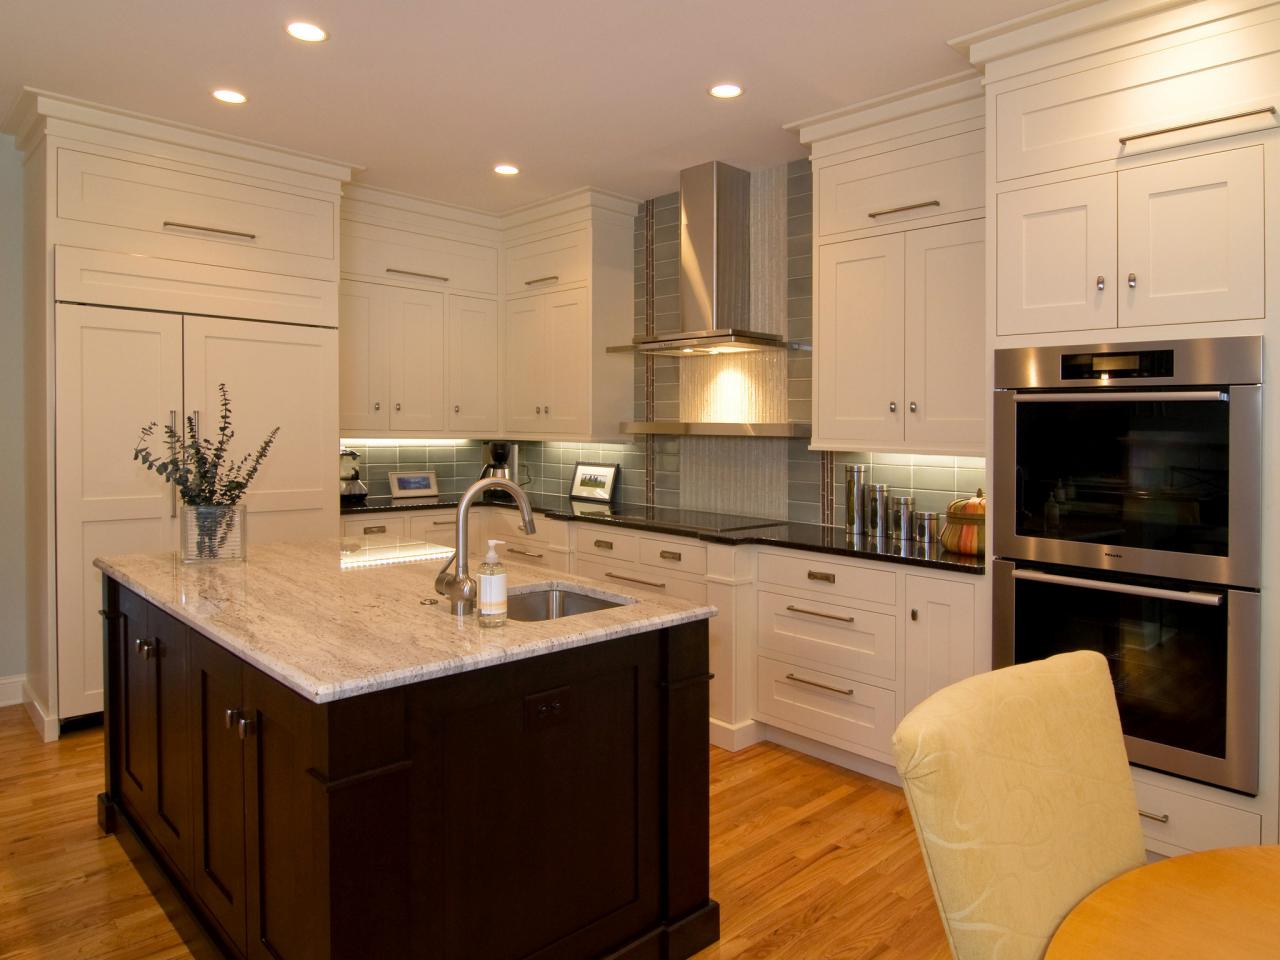 Shaker Kitchen Cabinets Pictures, Kitchen Ideas With White Shaker Cabinets